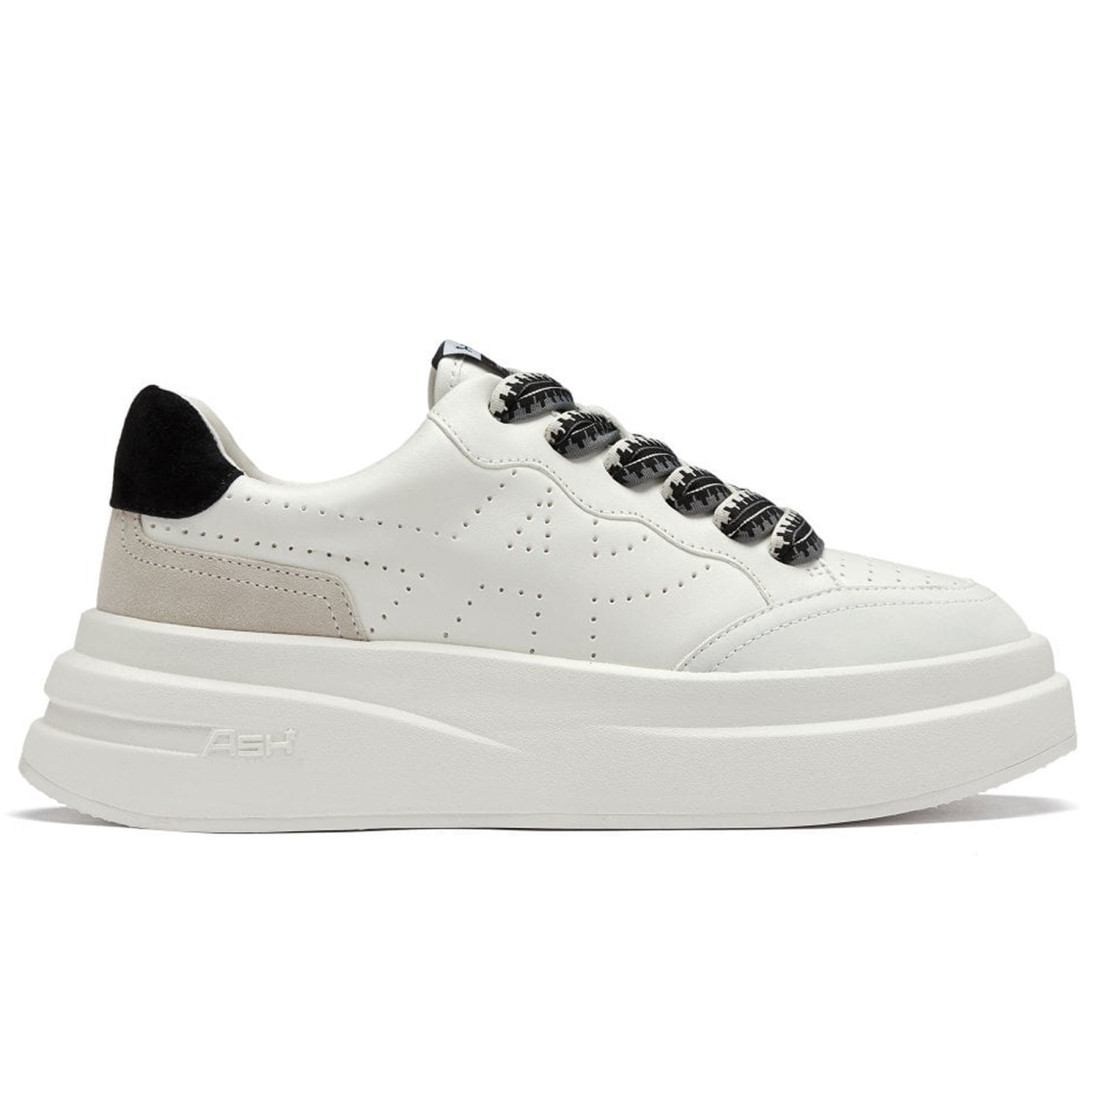 Impuls Bis white and black sneaker with patterned laces